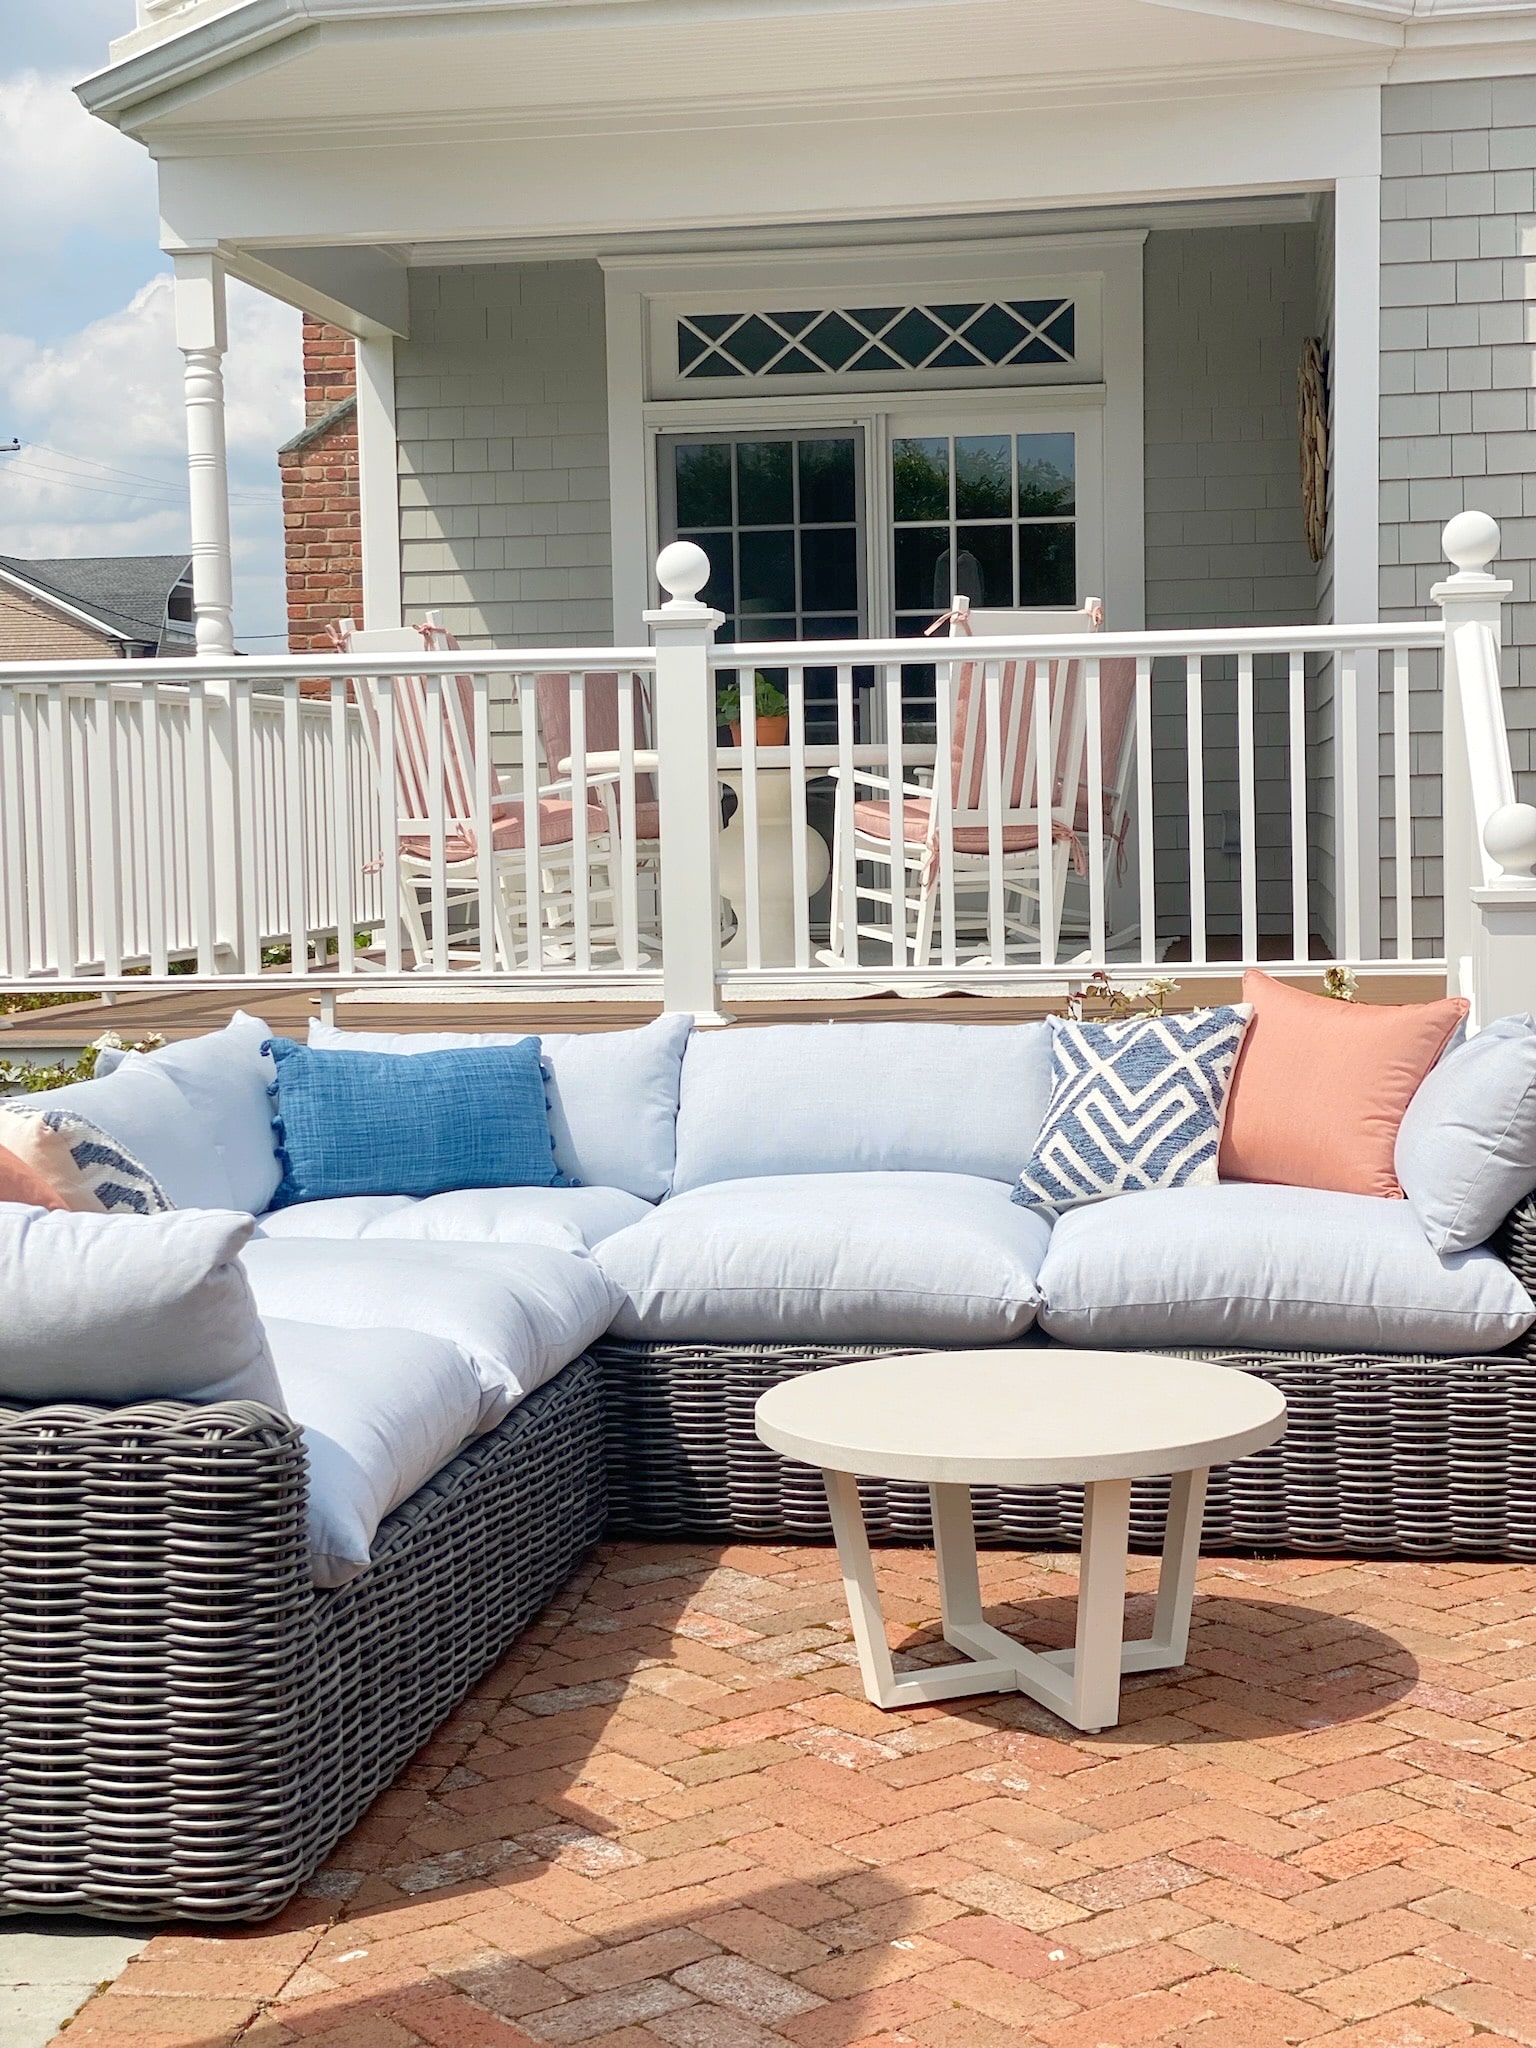 A wicker patio furniture set on a brick patio, adding a touch of design to the outdoor space.